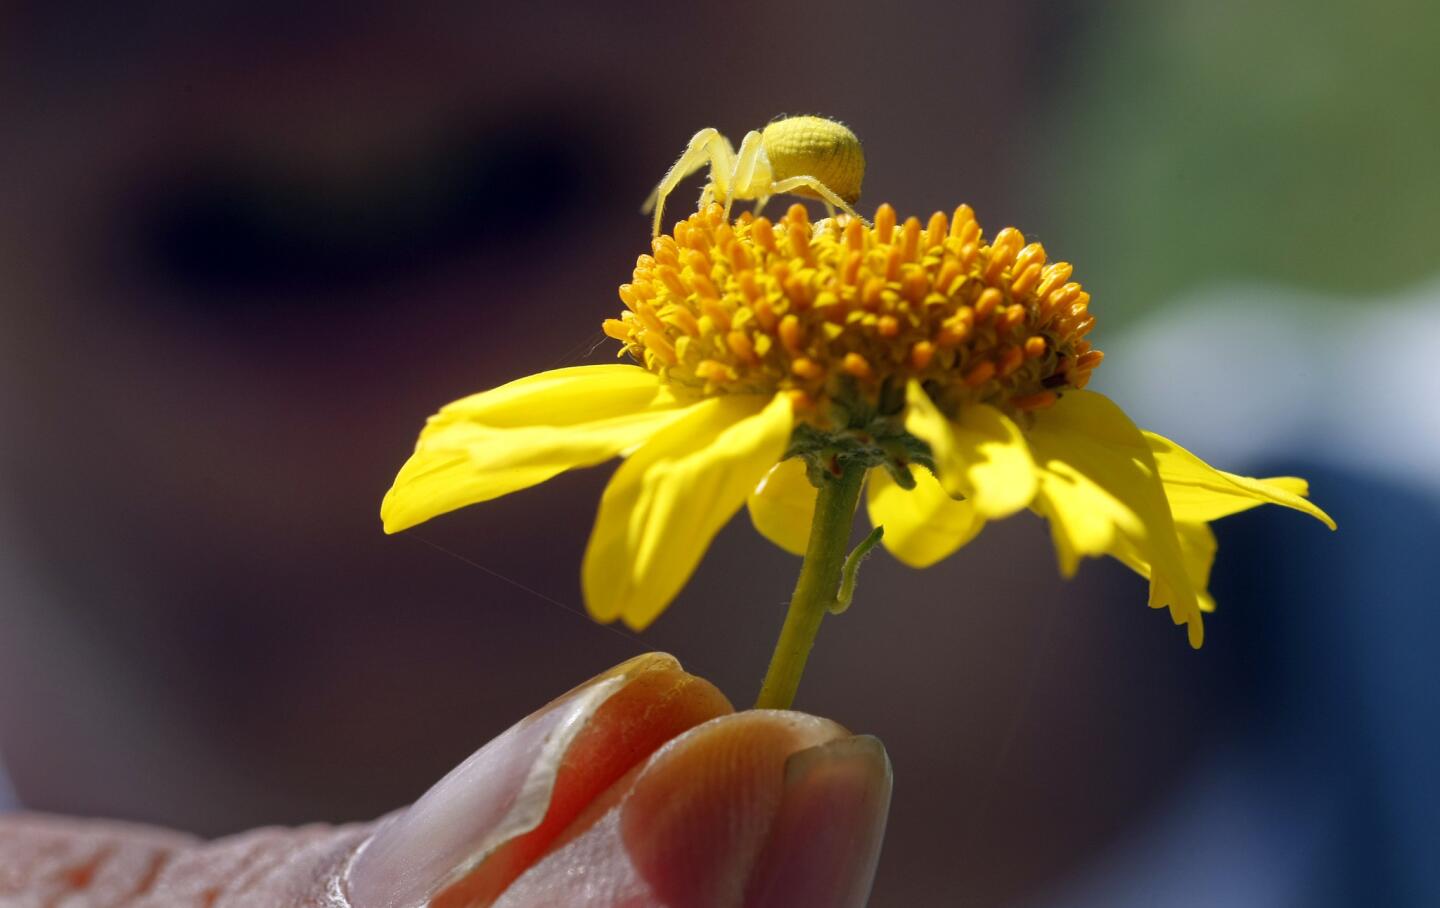 A yellow crab spider inspects a California brittlebush flower in Whitewater Canyon, Calif.